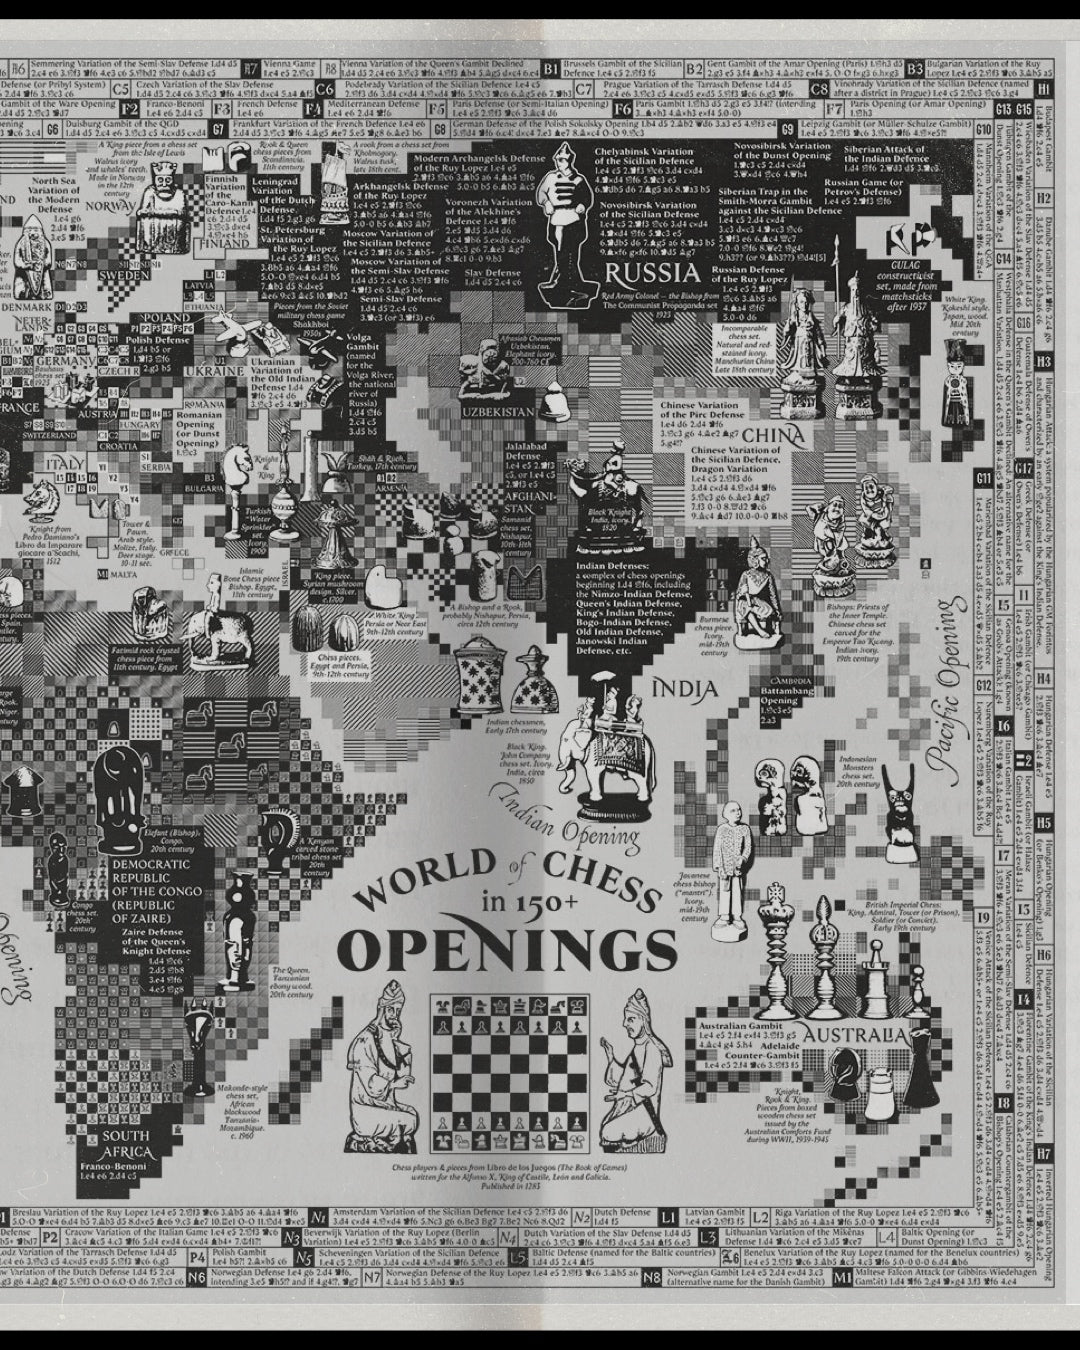 The Chess Map of the World (limited Edition) - buy online with worldwide shipping